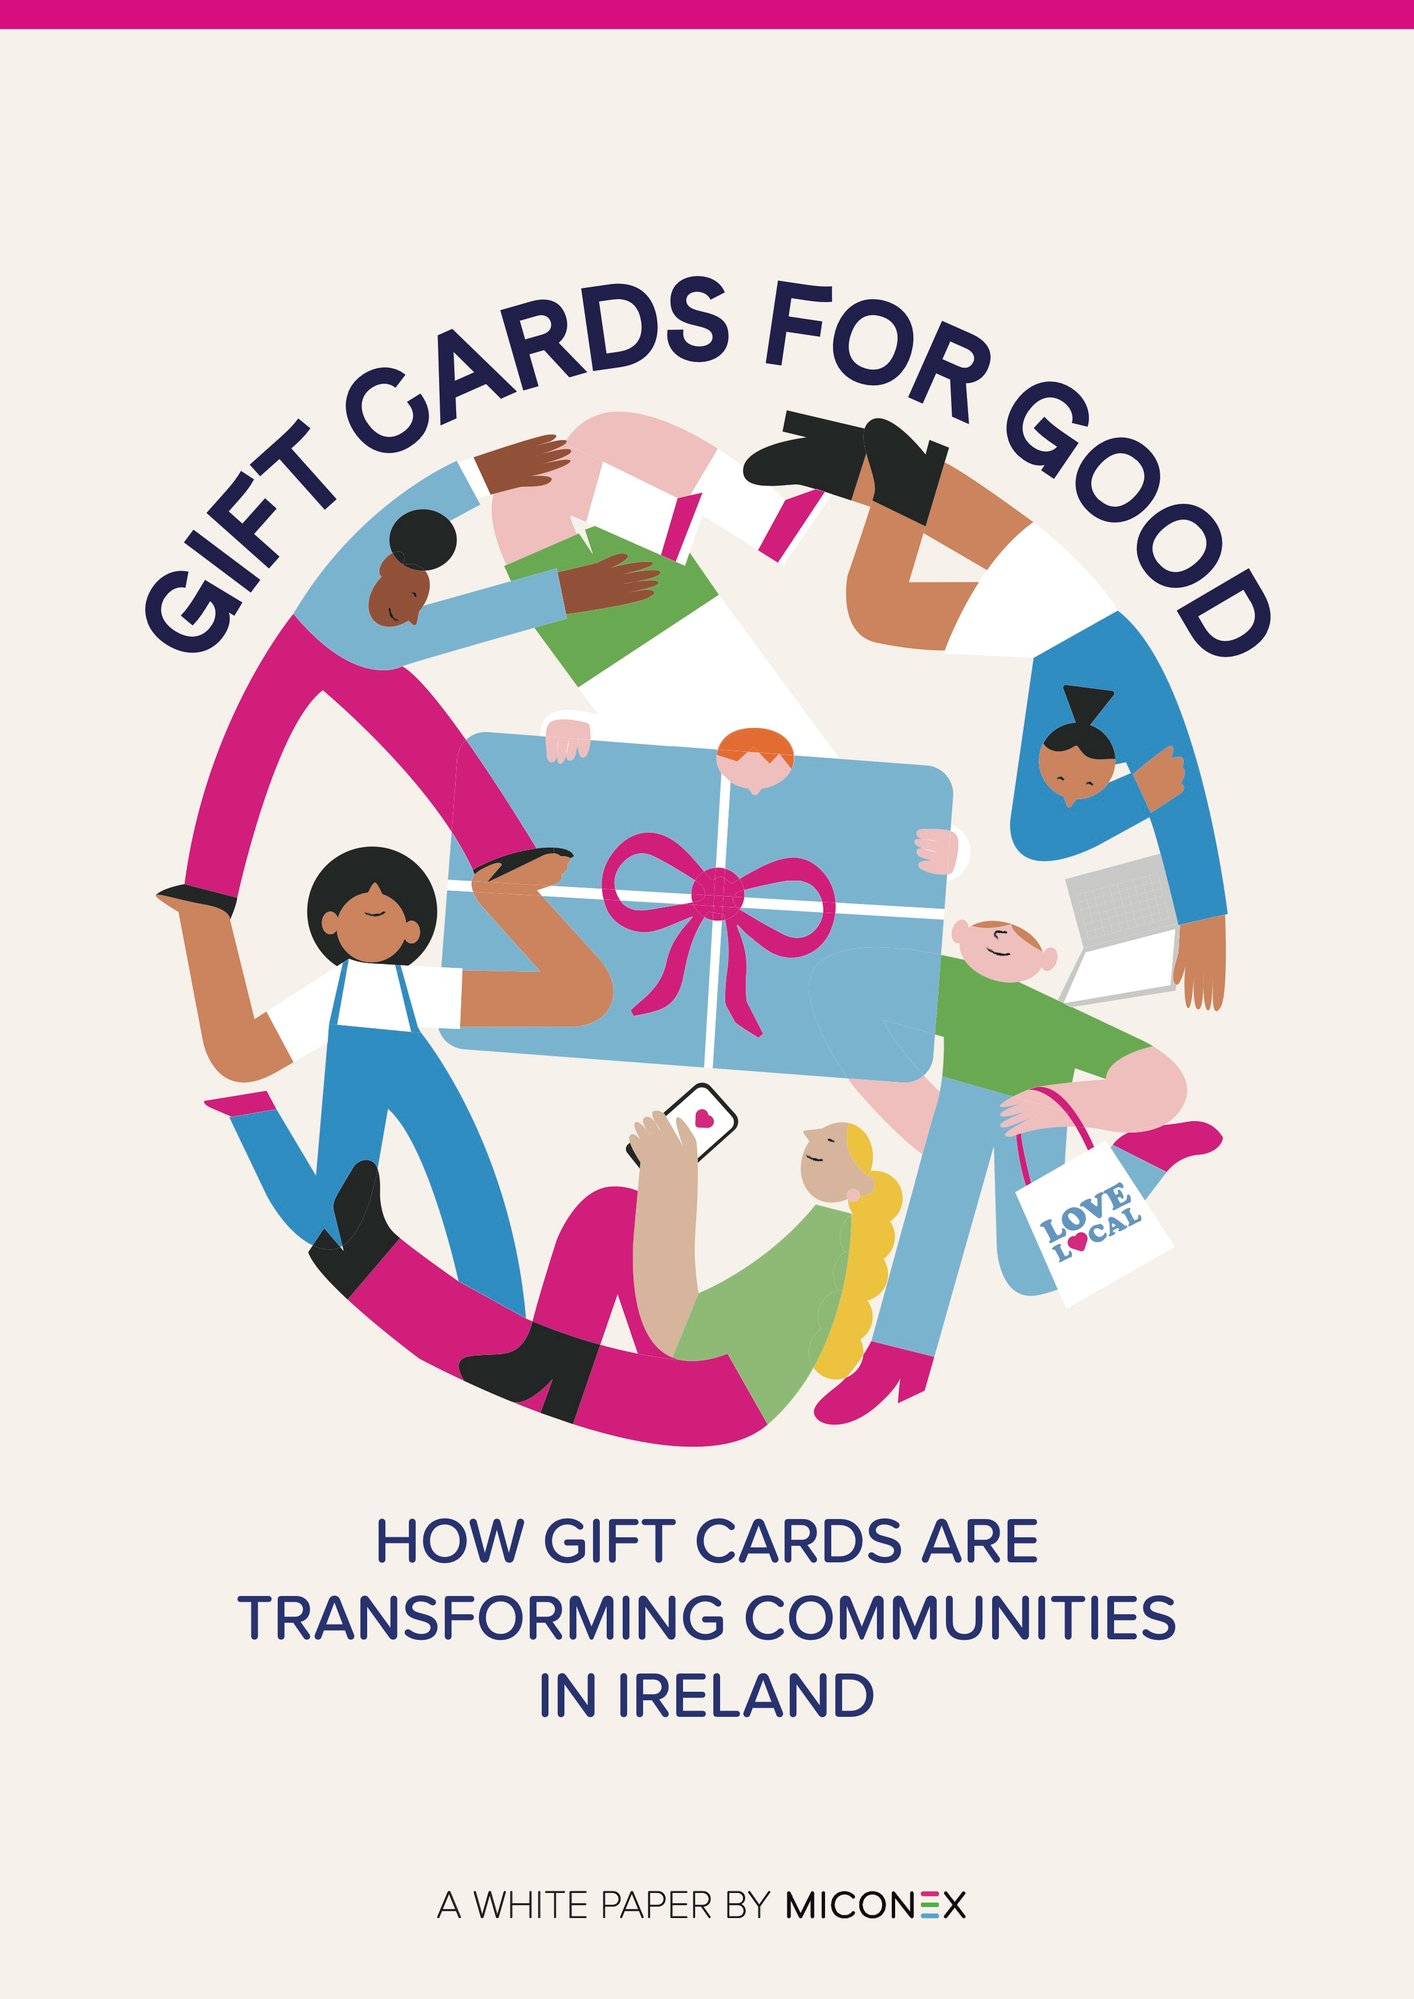 Gift Cards for Good White Paper IRELAND (1)